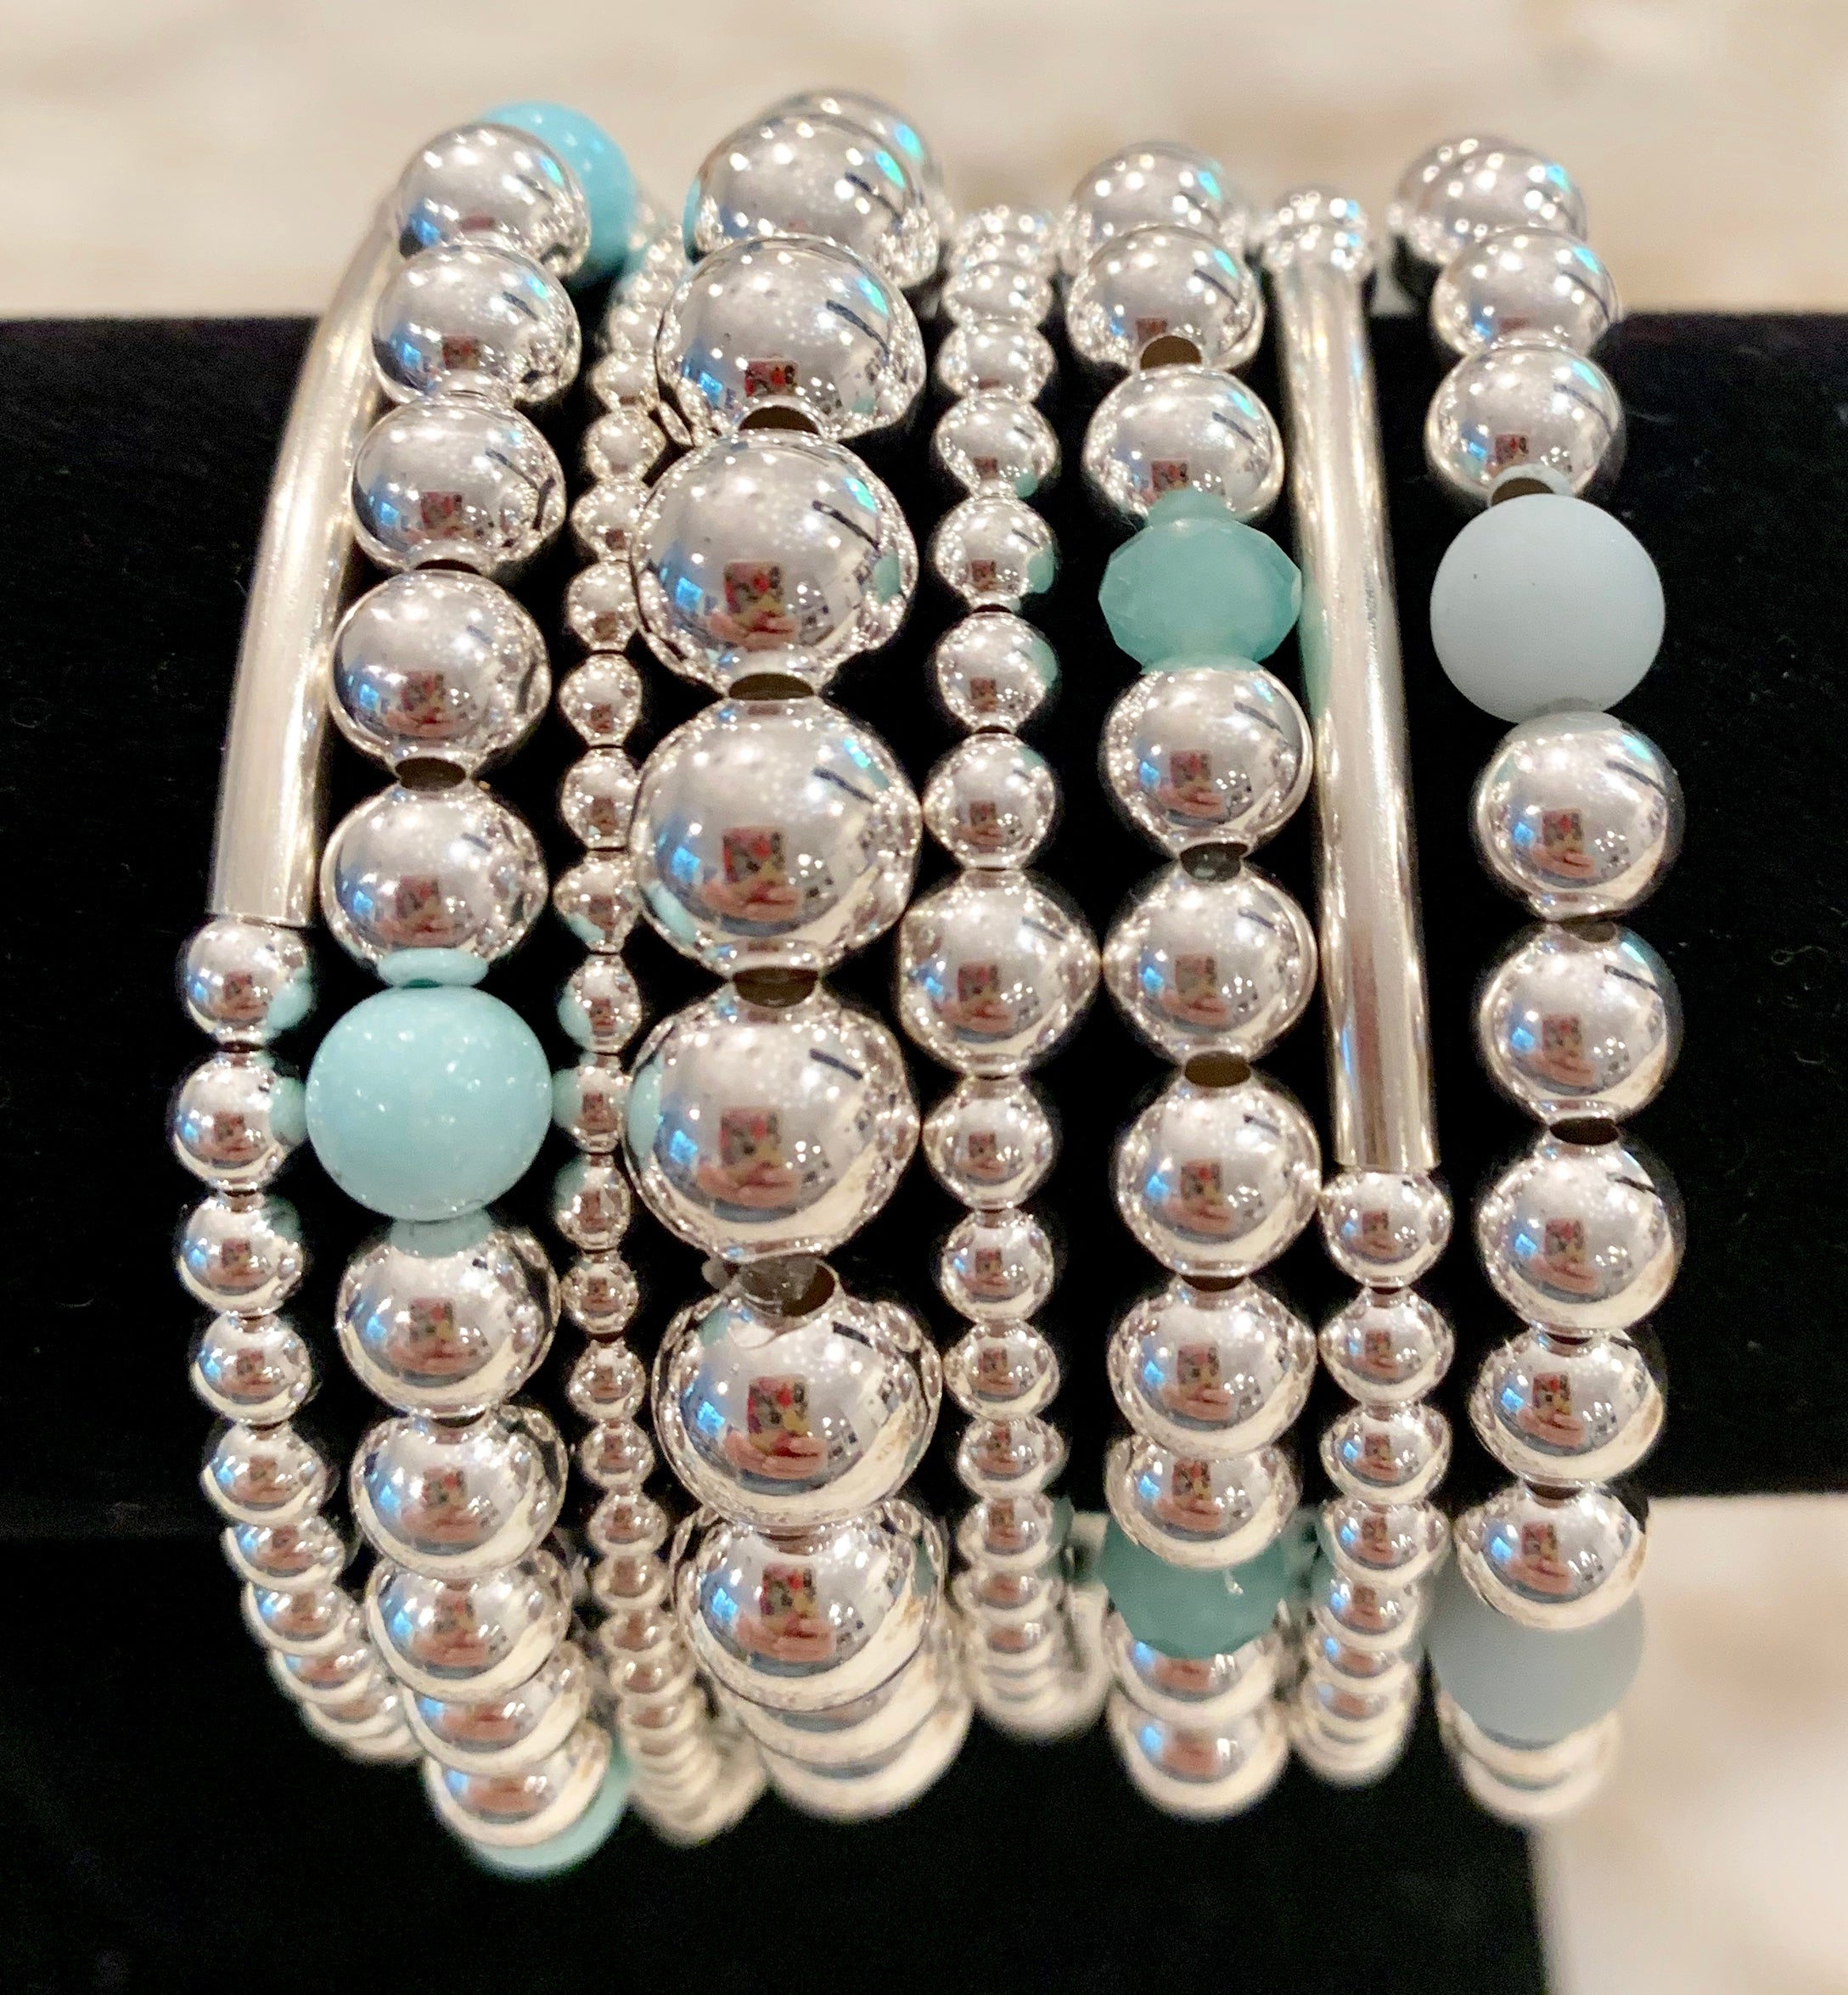 MUFFY 8 Piece Sterling Silver Bead Bracelet Stack with Pale Turquoise, Green Opal and Matte Aquamarine Stones